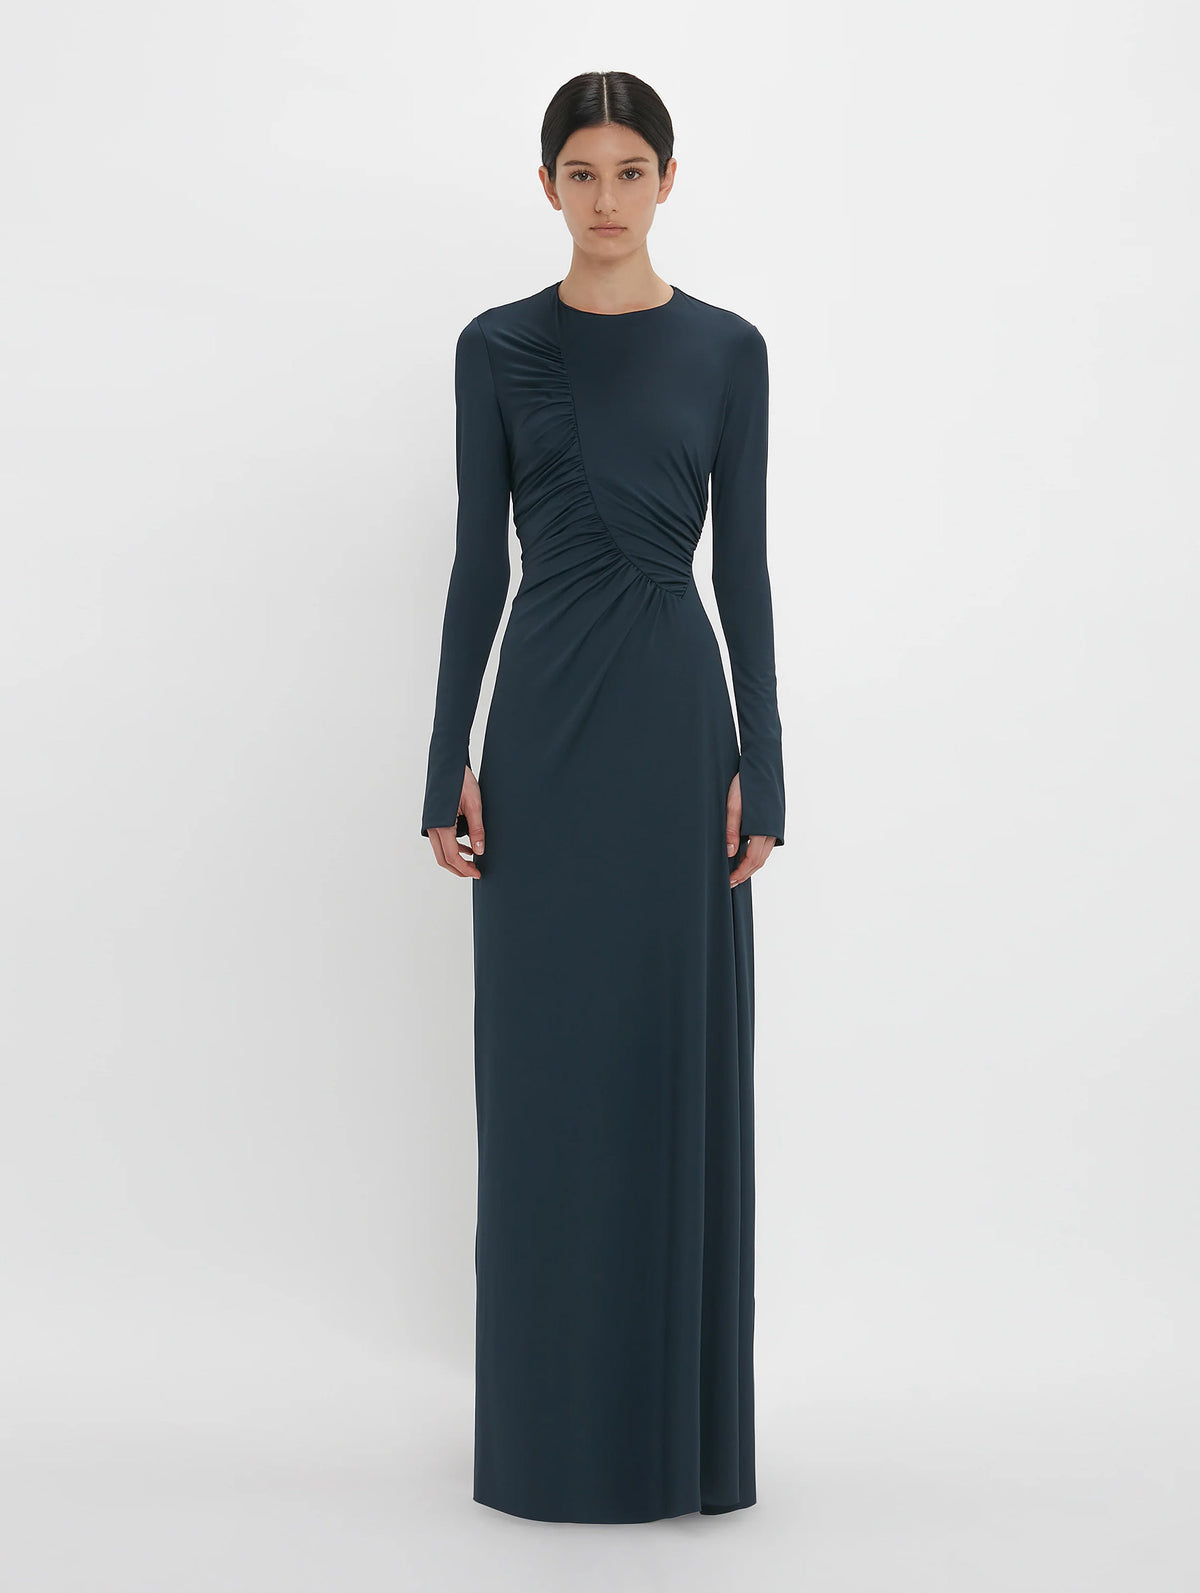 Ruched Detail Gown in Midnight